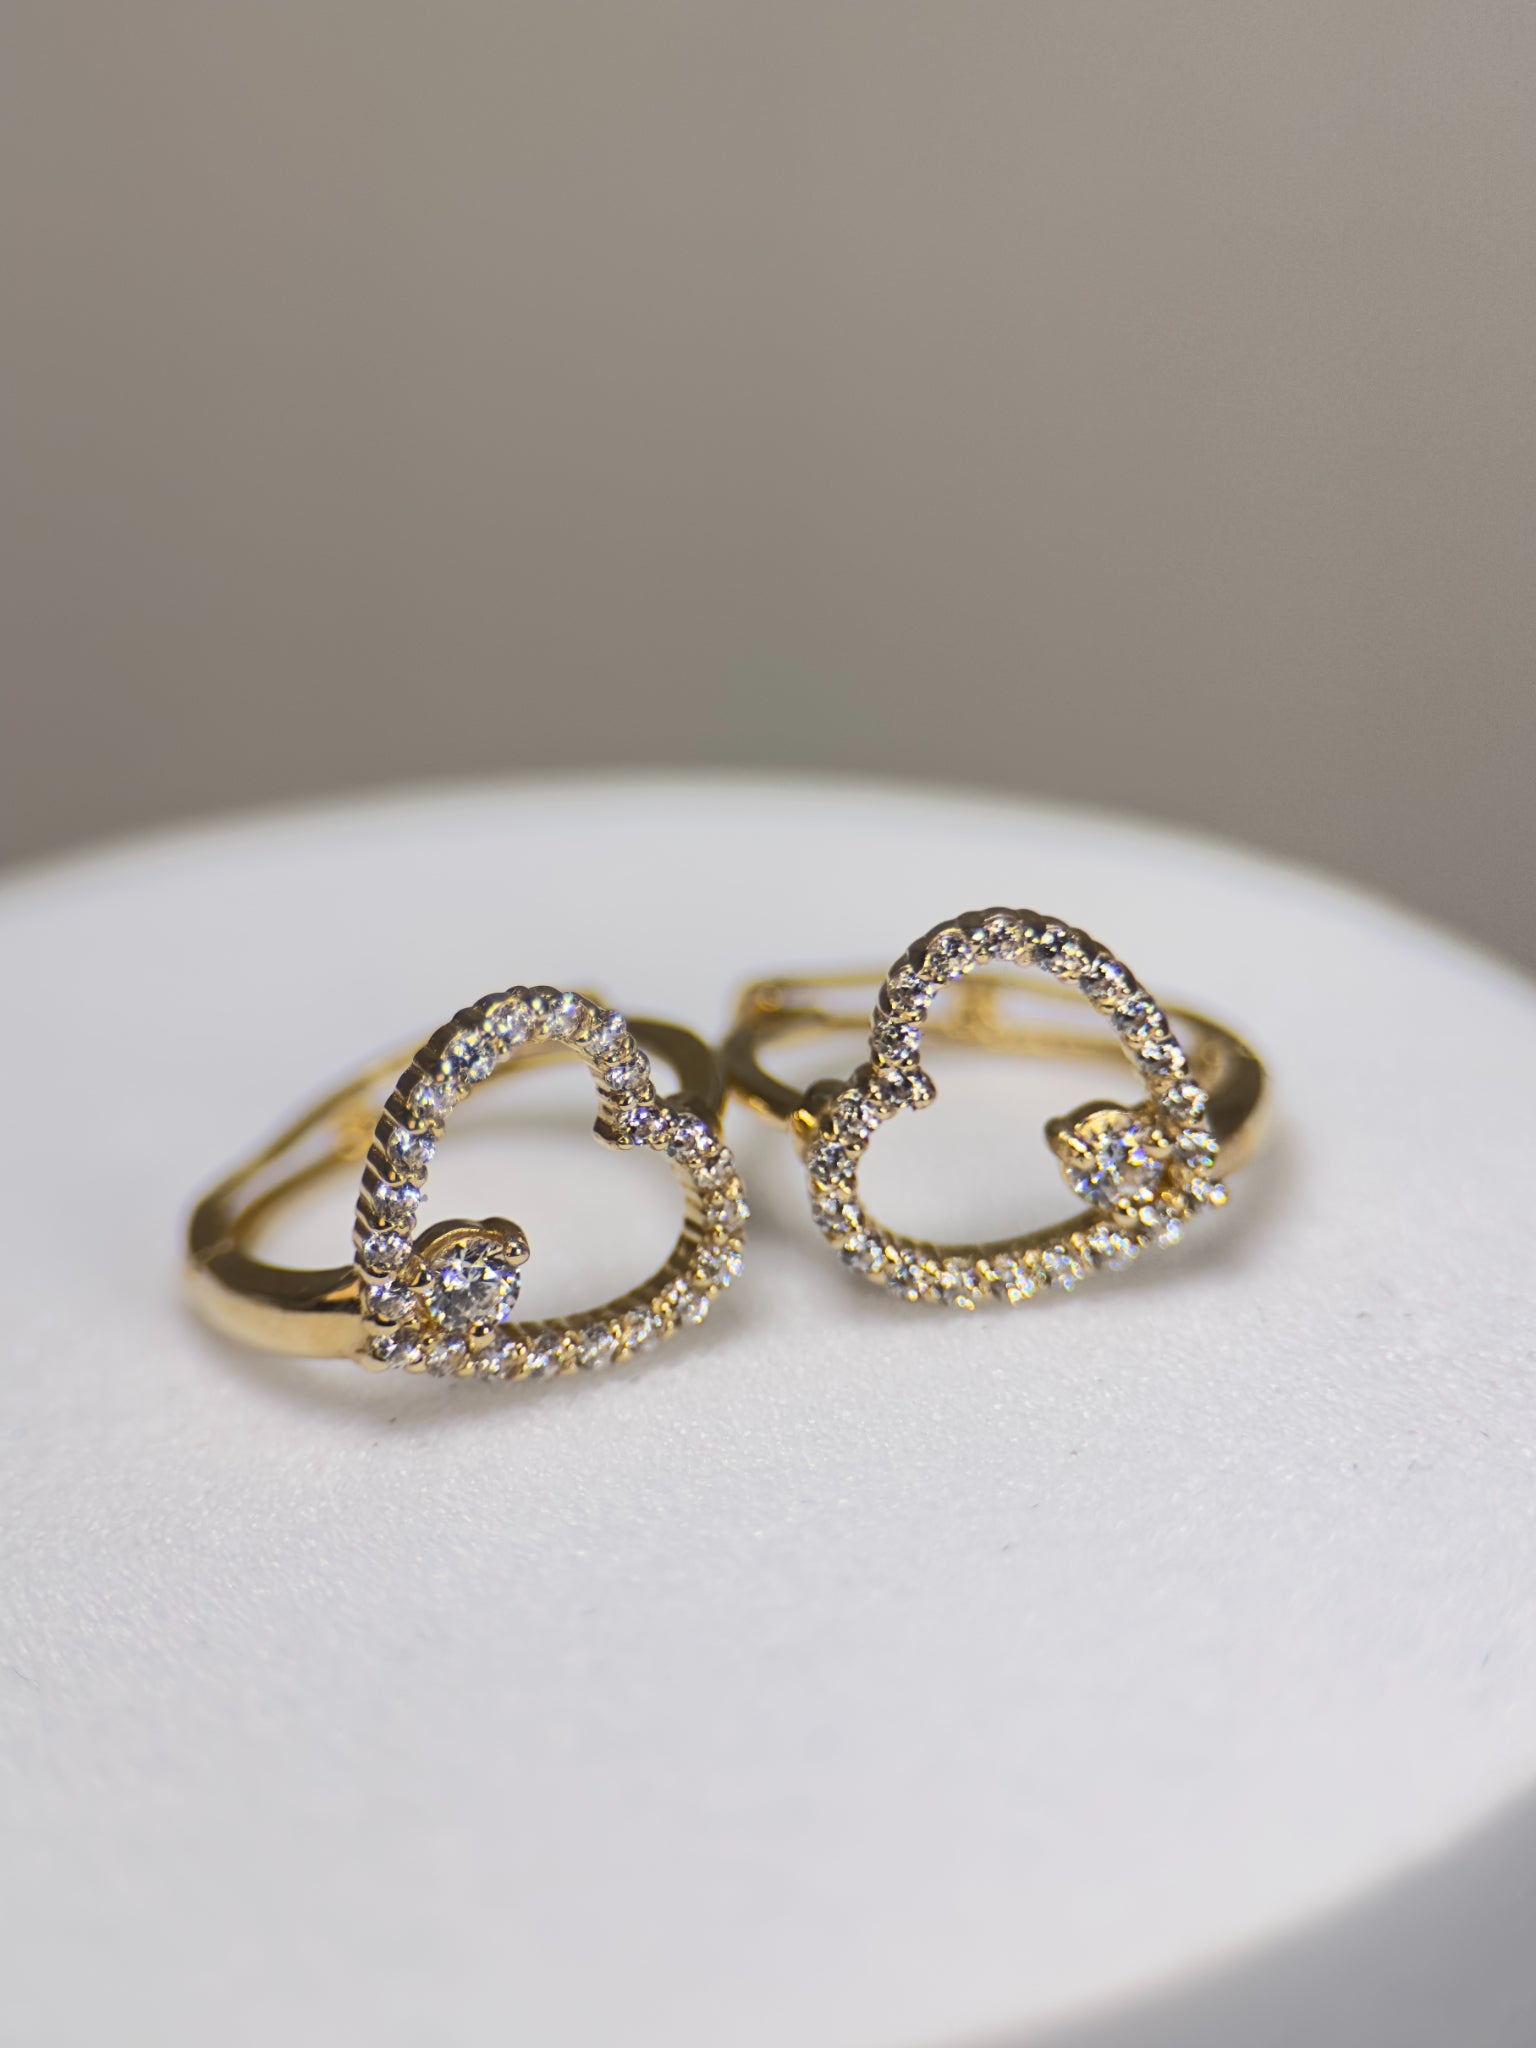 DR2430 - 14K Yellow Gold - Lab Created Stones - 14K Yellow Gold Huggies - Hearts